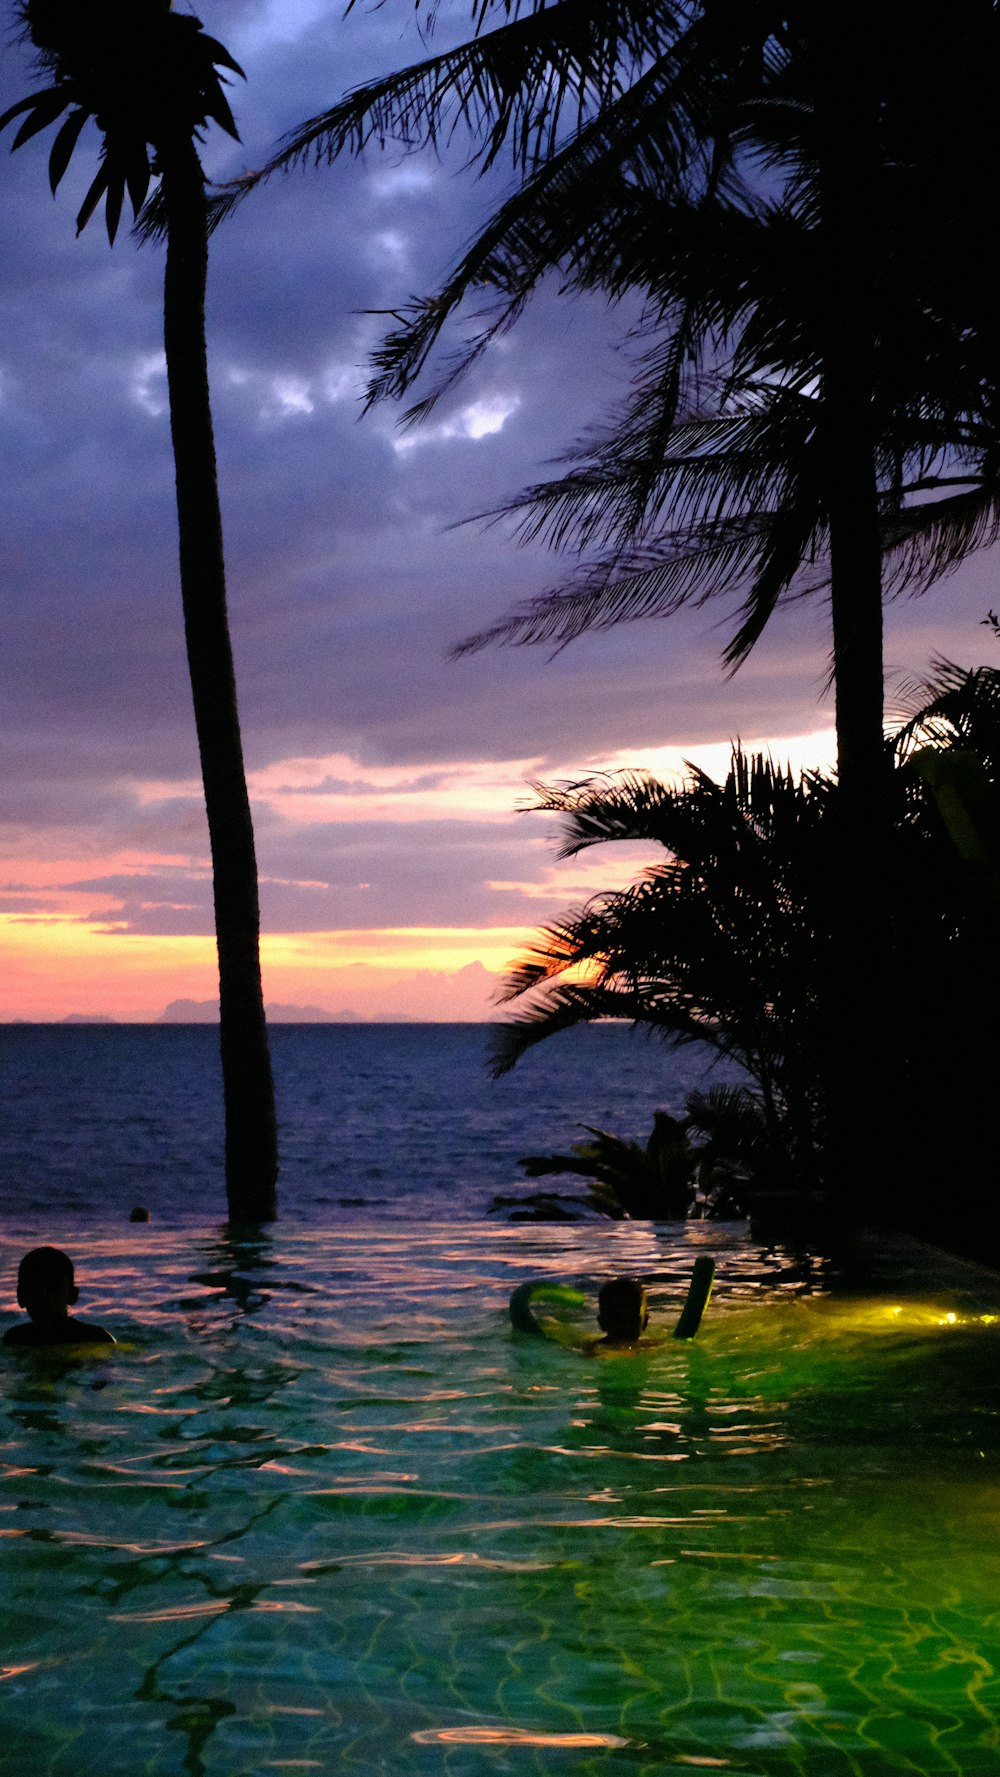 a group of people in a pool by palm trees and a sunset